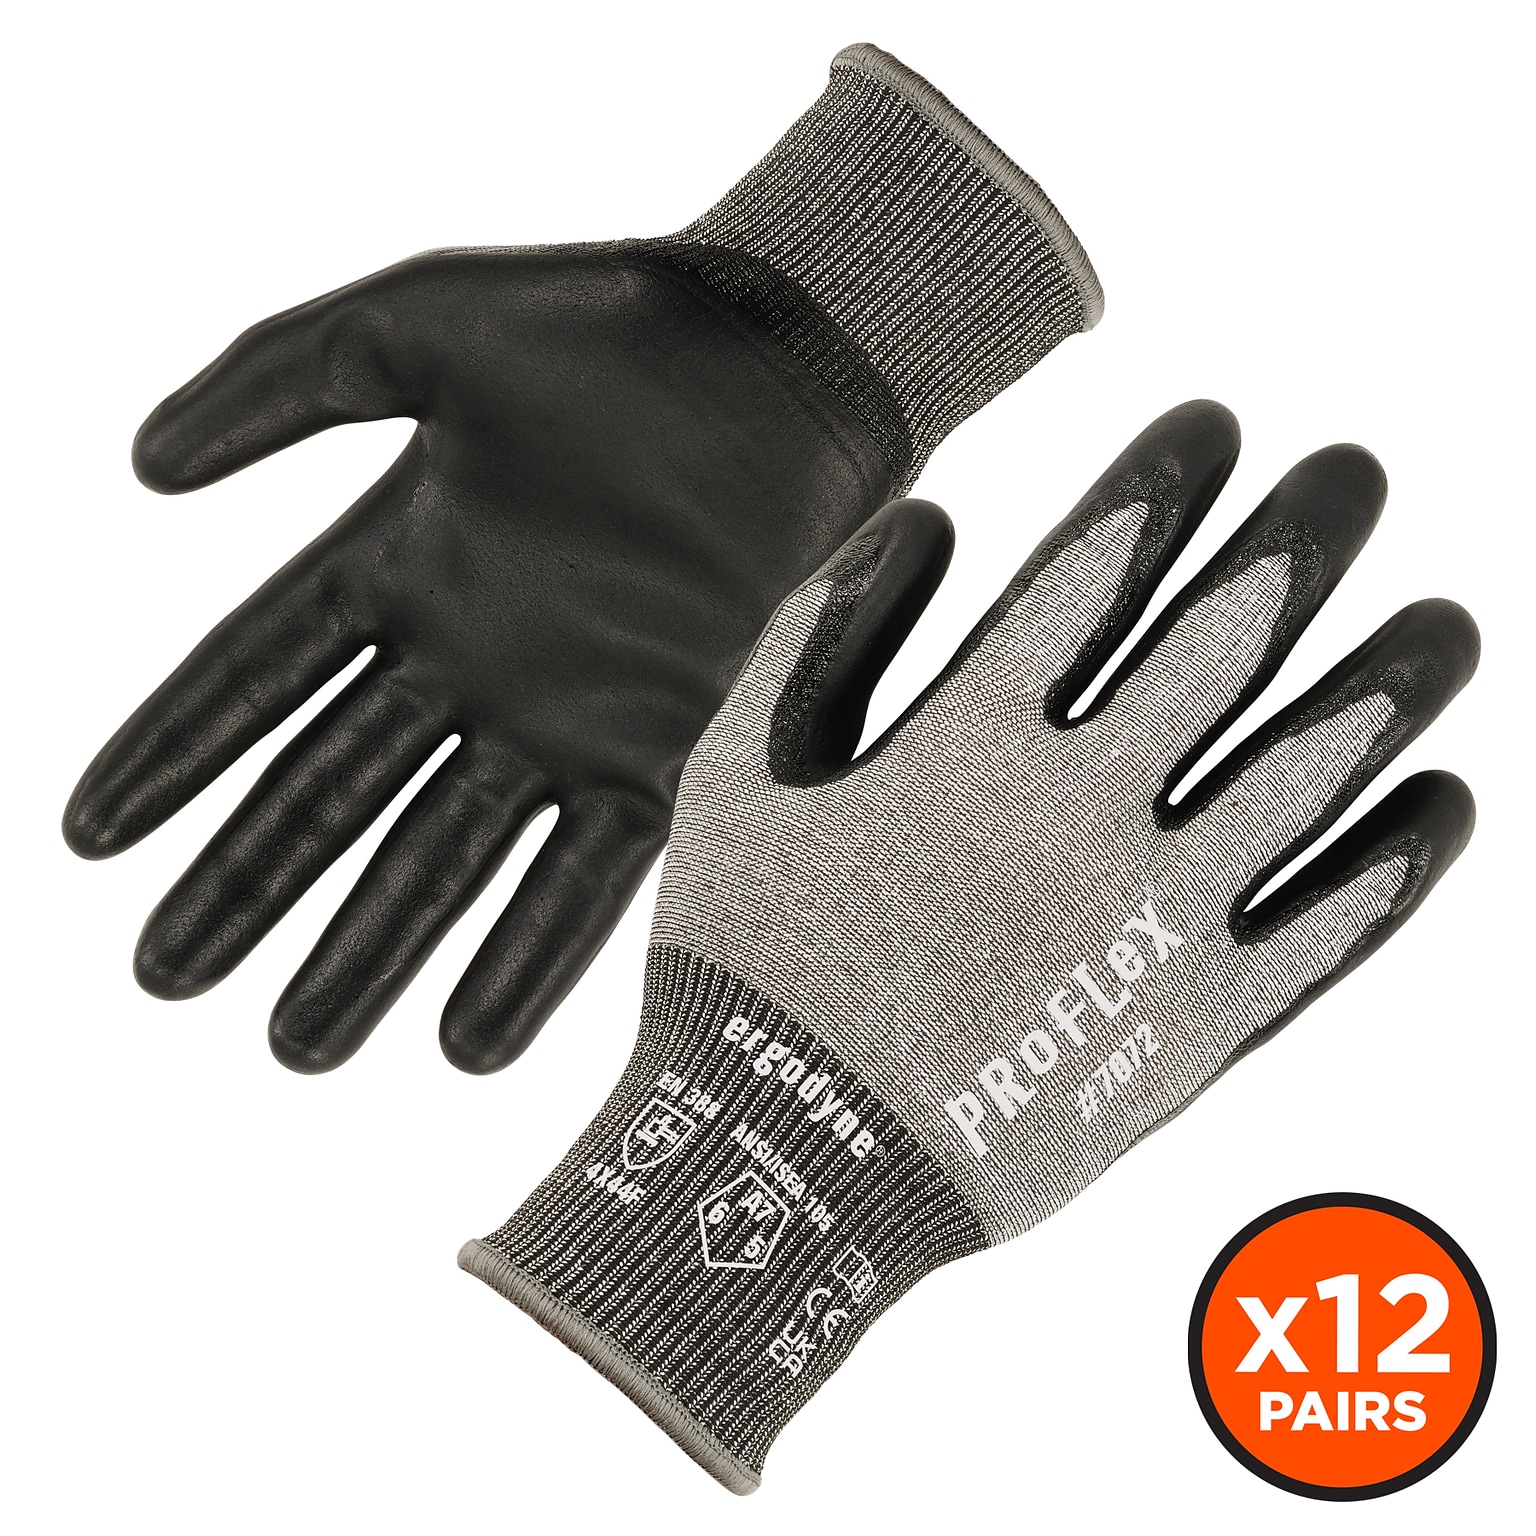 Ergodyne ProFlex 7072 Nitrile Coated Cut-Resistant Gloves, ANSI A7, Gray, Small, 12 Pair (10302)